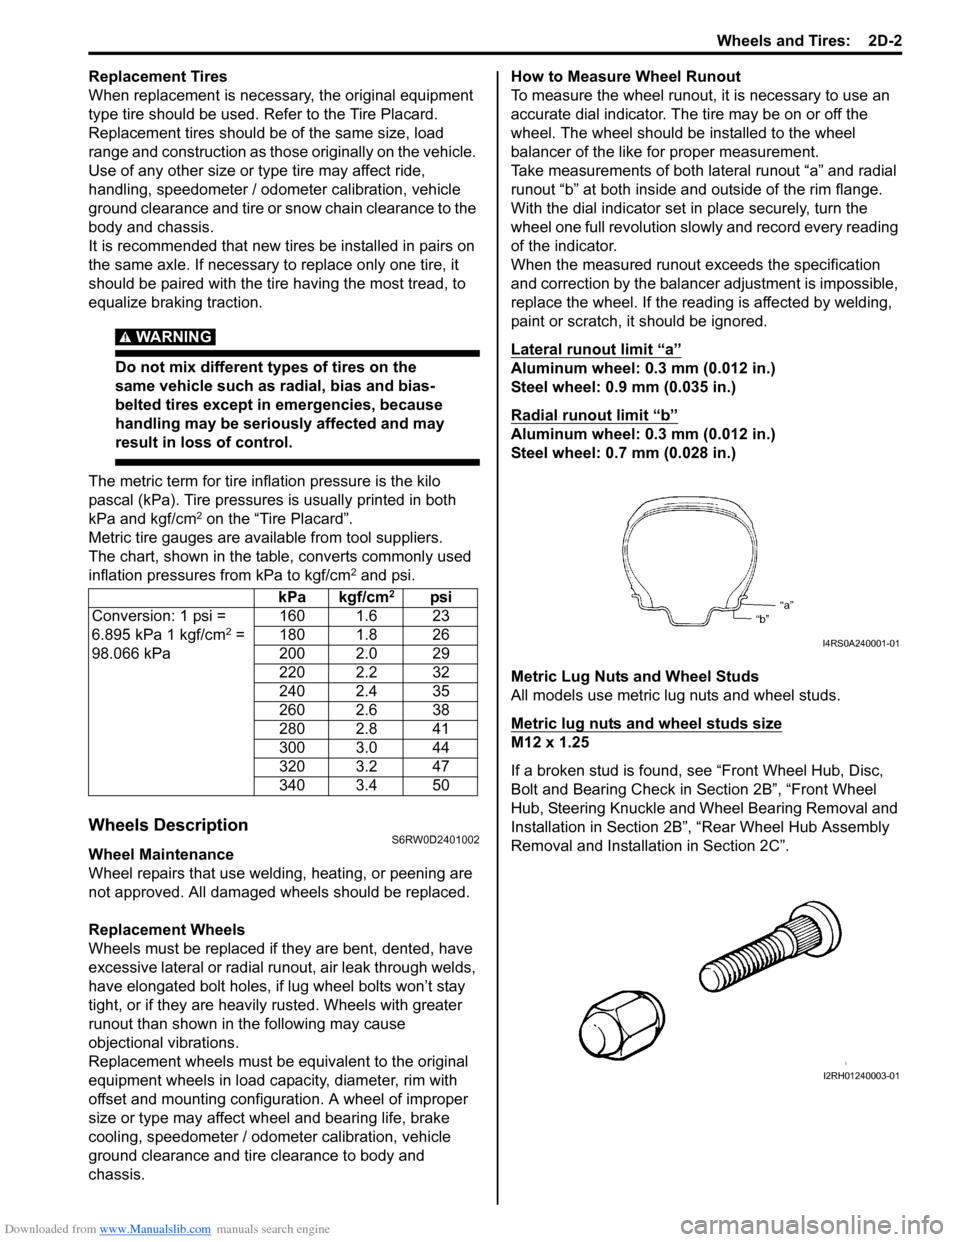 SUZUKI SX4 2006 1.G Service Workshop Manual Downloaded from www.Manualslib.com manuals search engine Wheels and Tires:  2D-2
Replacement Tires
When replacement is necessary, the original equipment 
type tire should be used. Refer to the Tire Pl